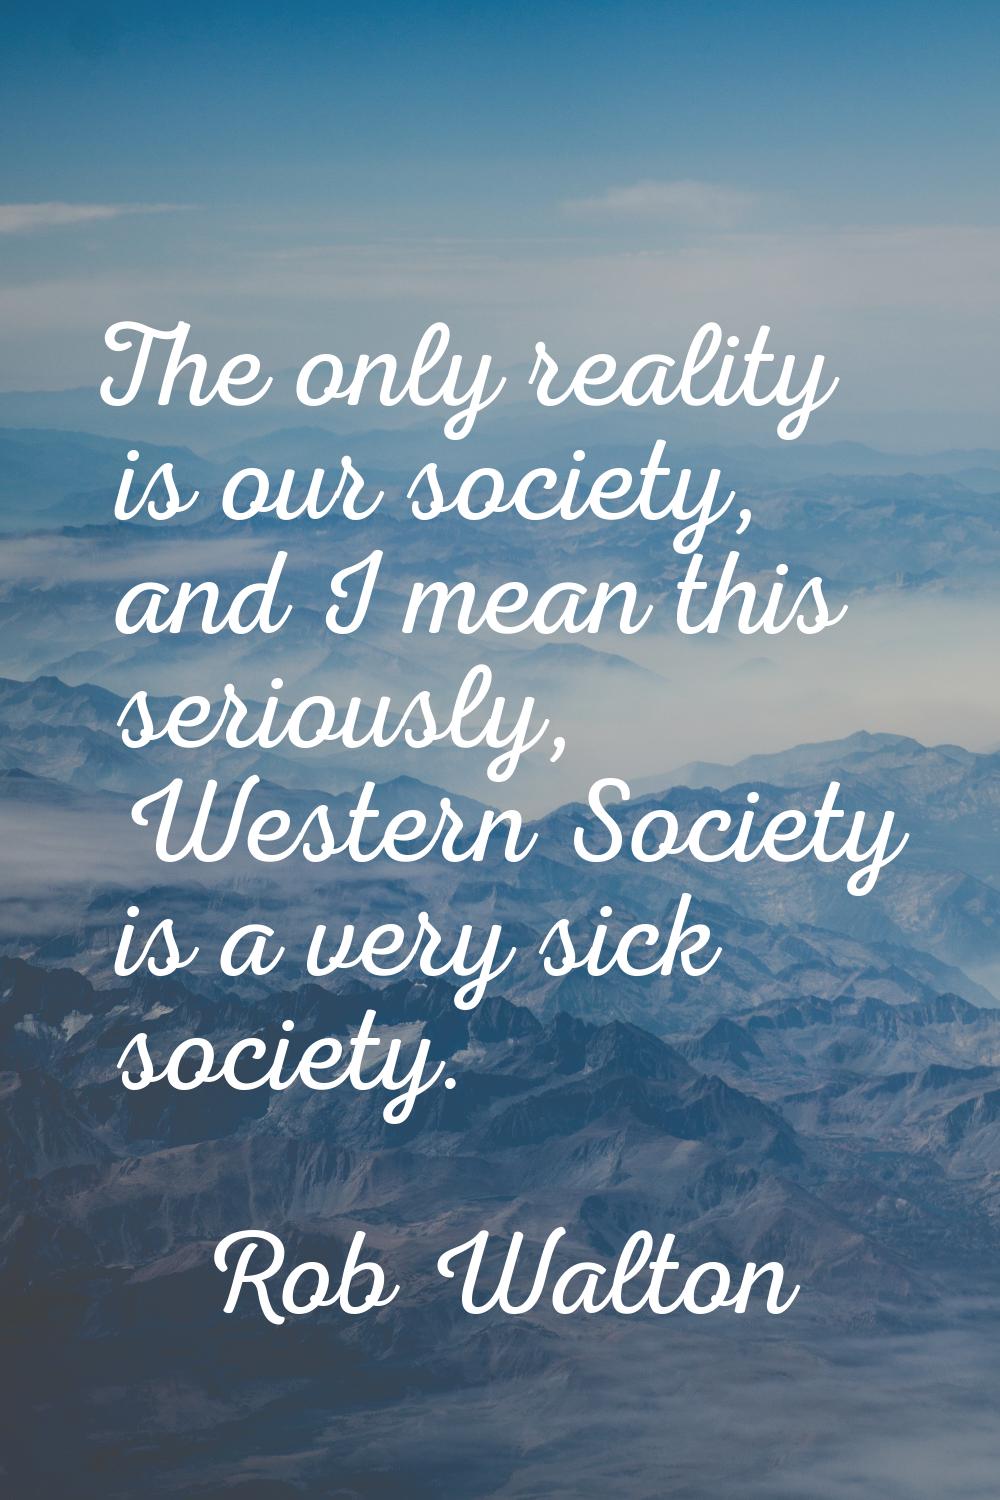 The only reality is our society, and I mean this seriously, Western Society is a very sick society.